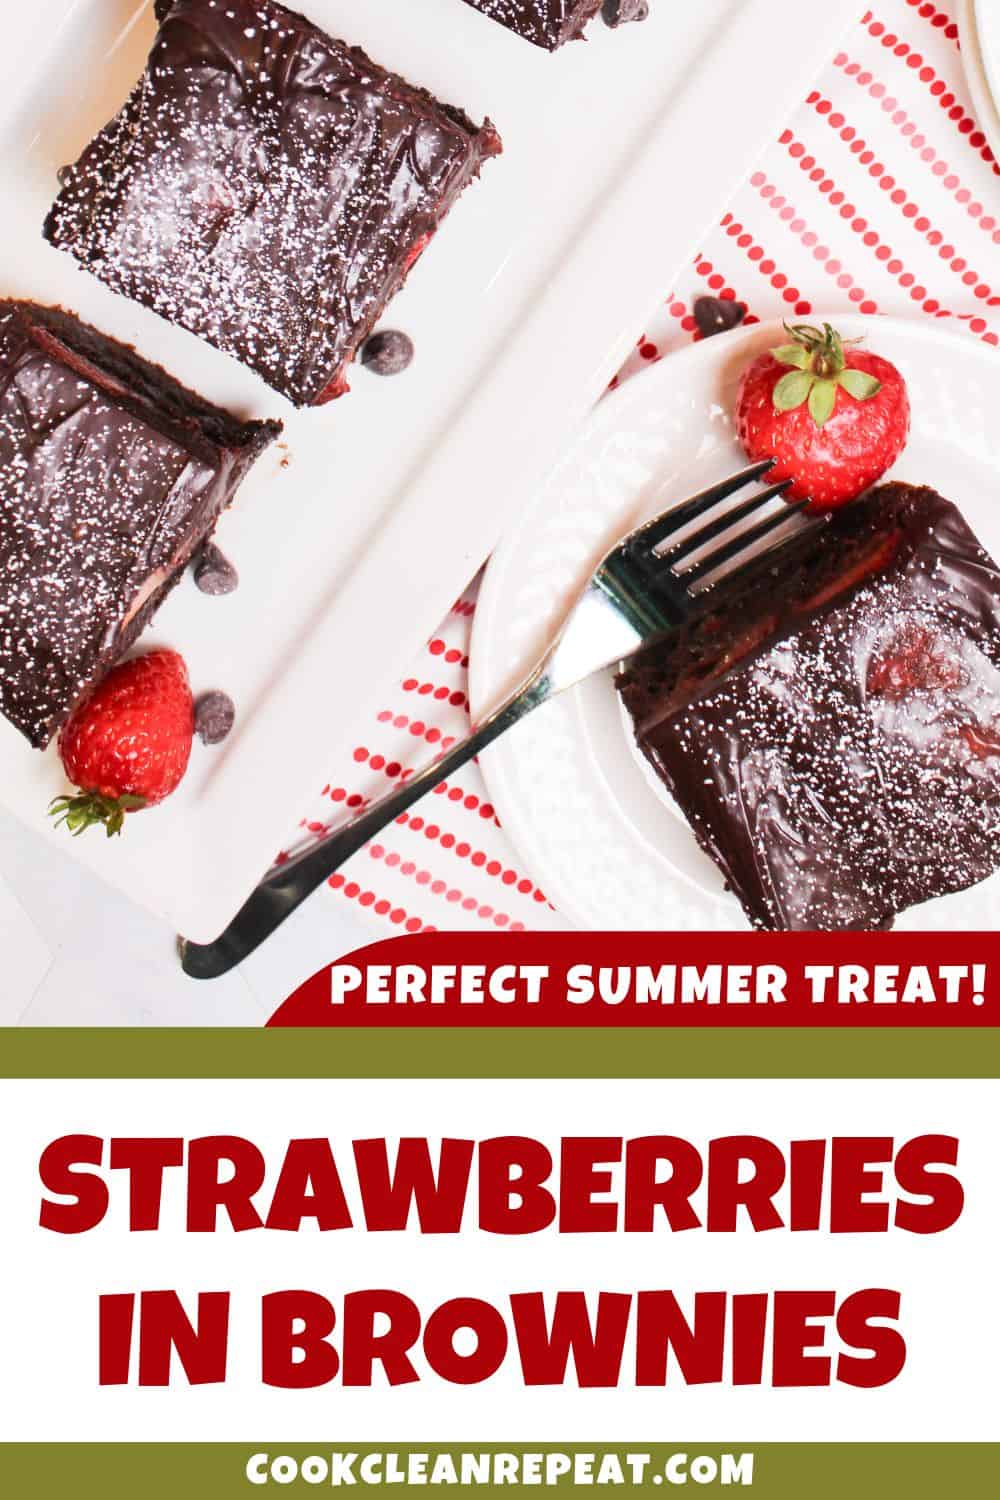 Pinterest image made for Strawberries in brownies recipe.